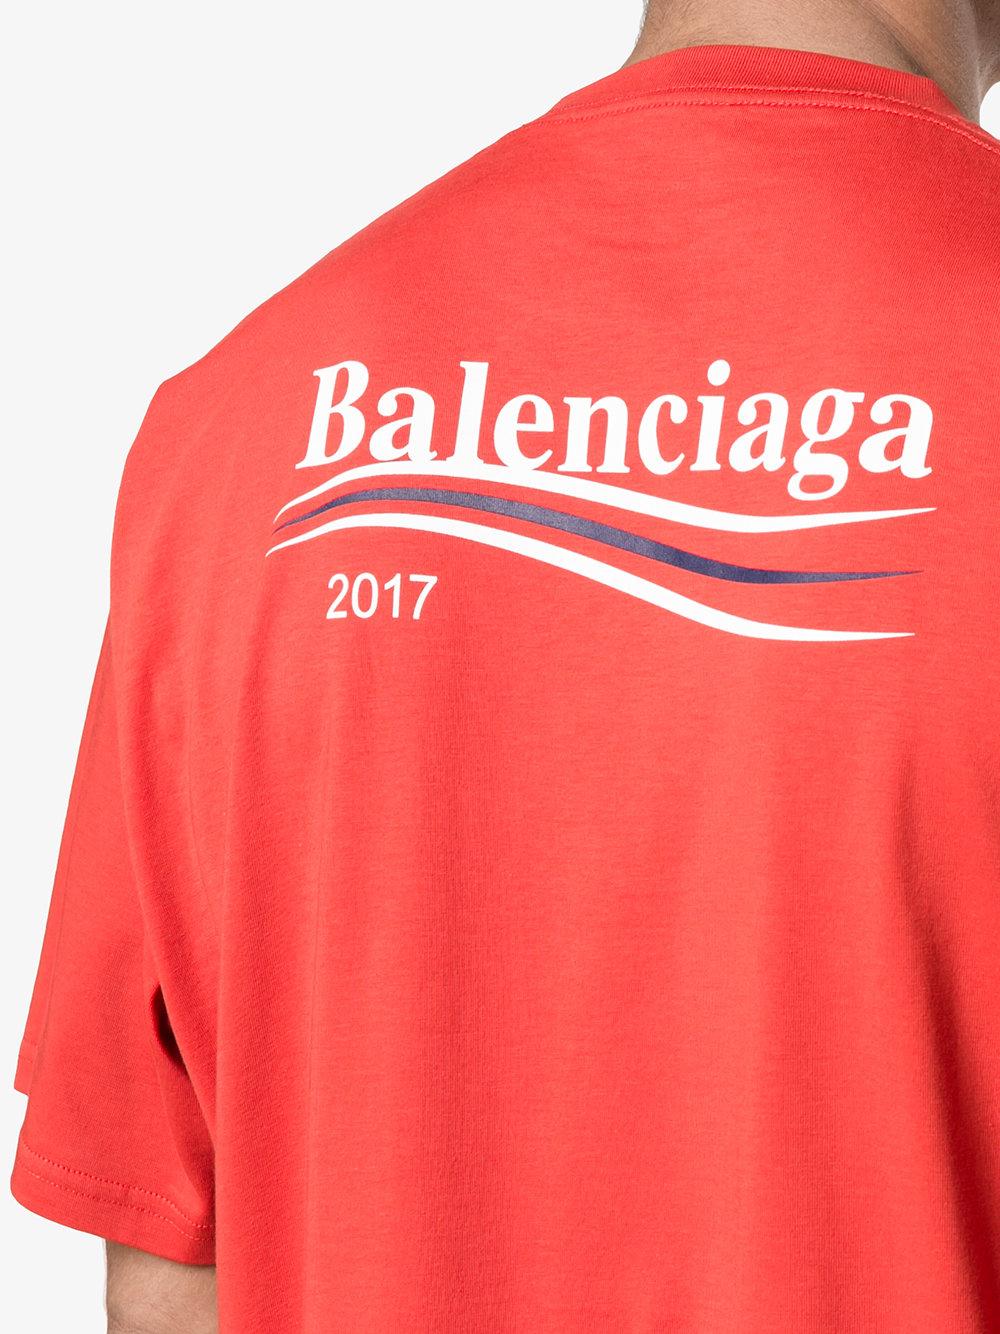 Balenciaga Cotton Oversized Logo T Shirt In Red For Men Lyst